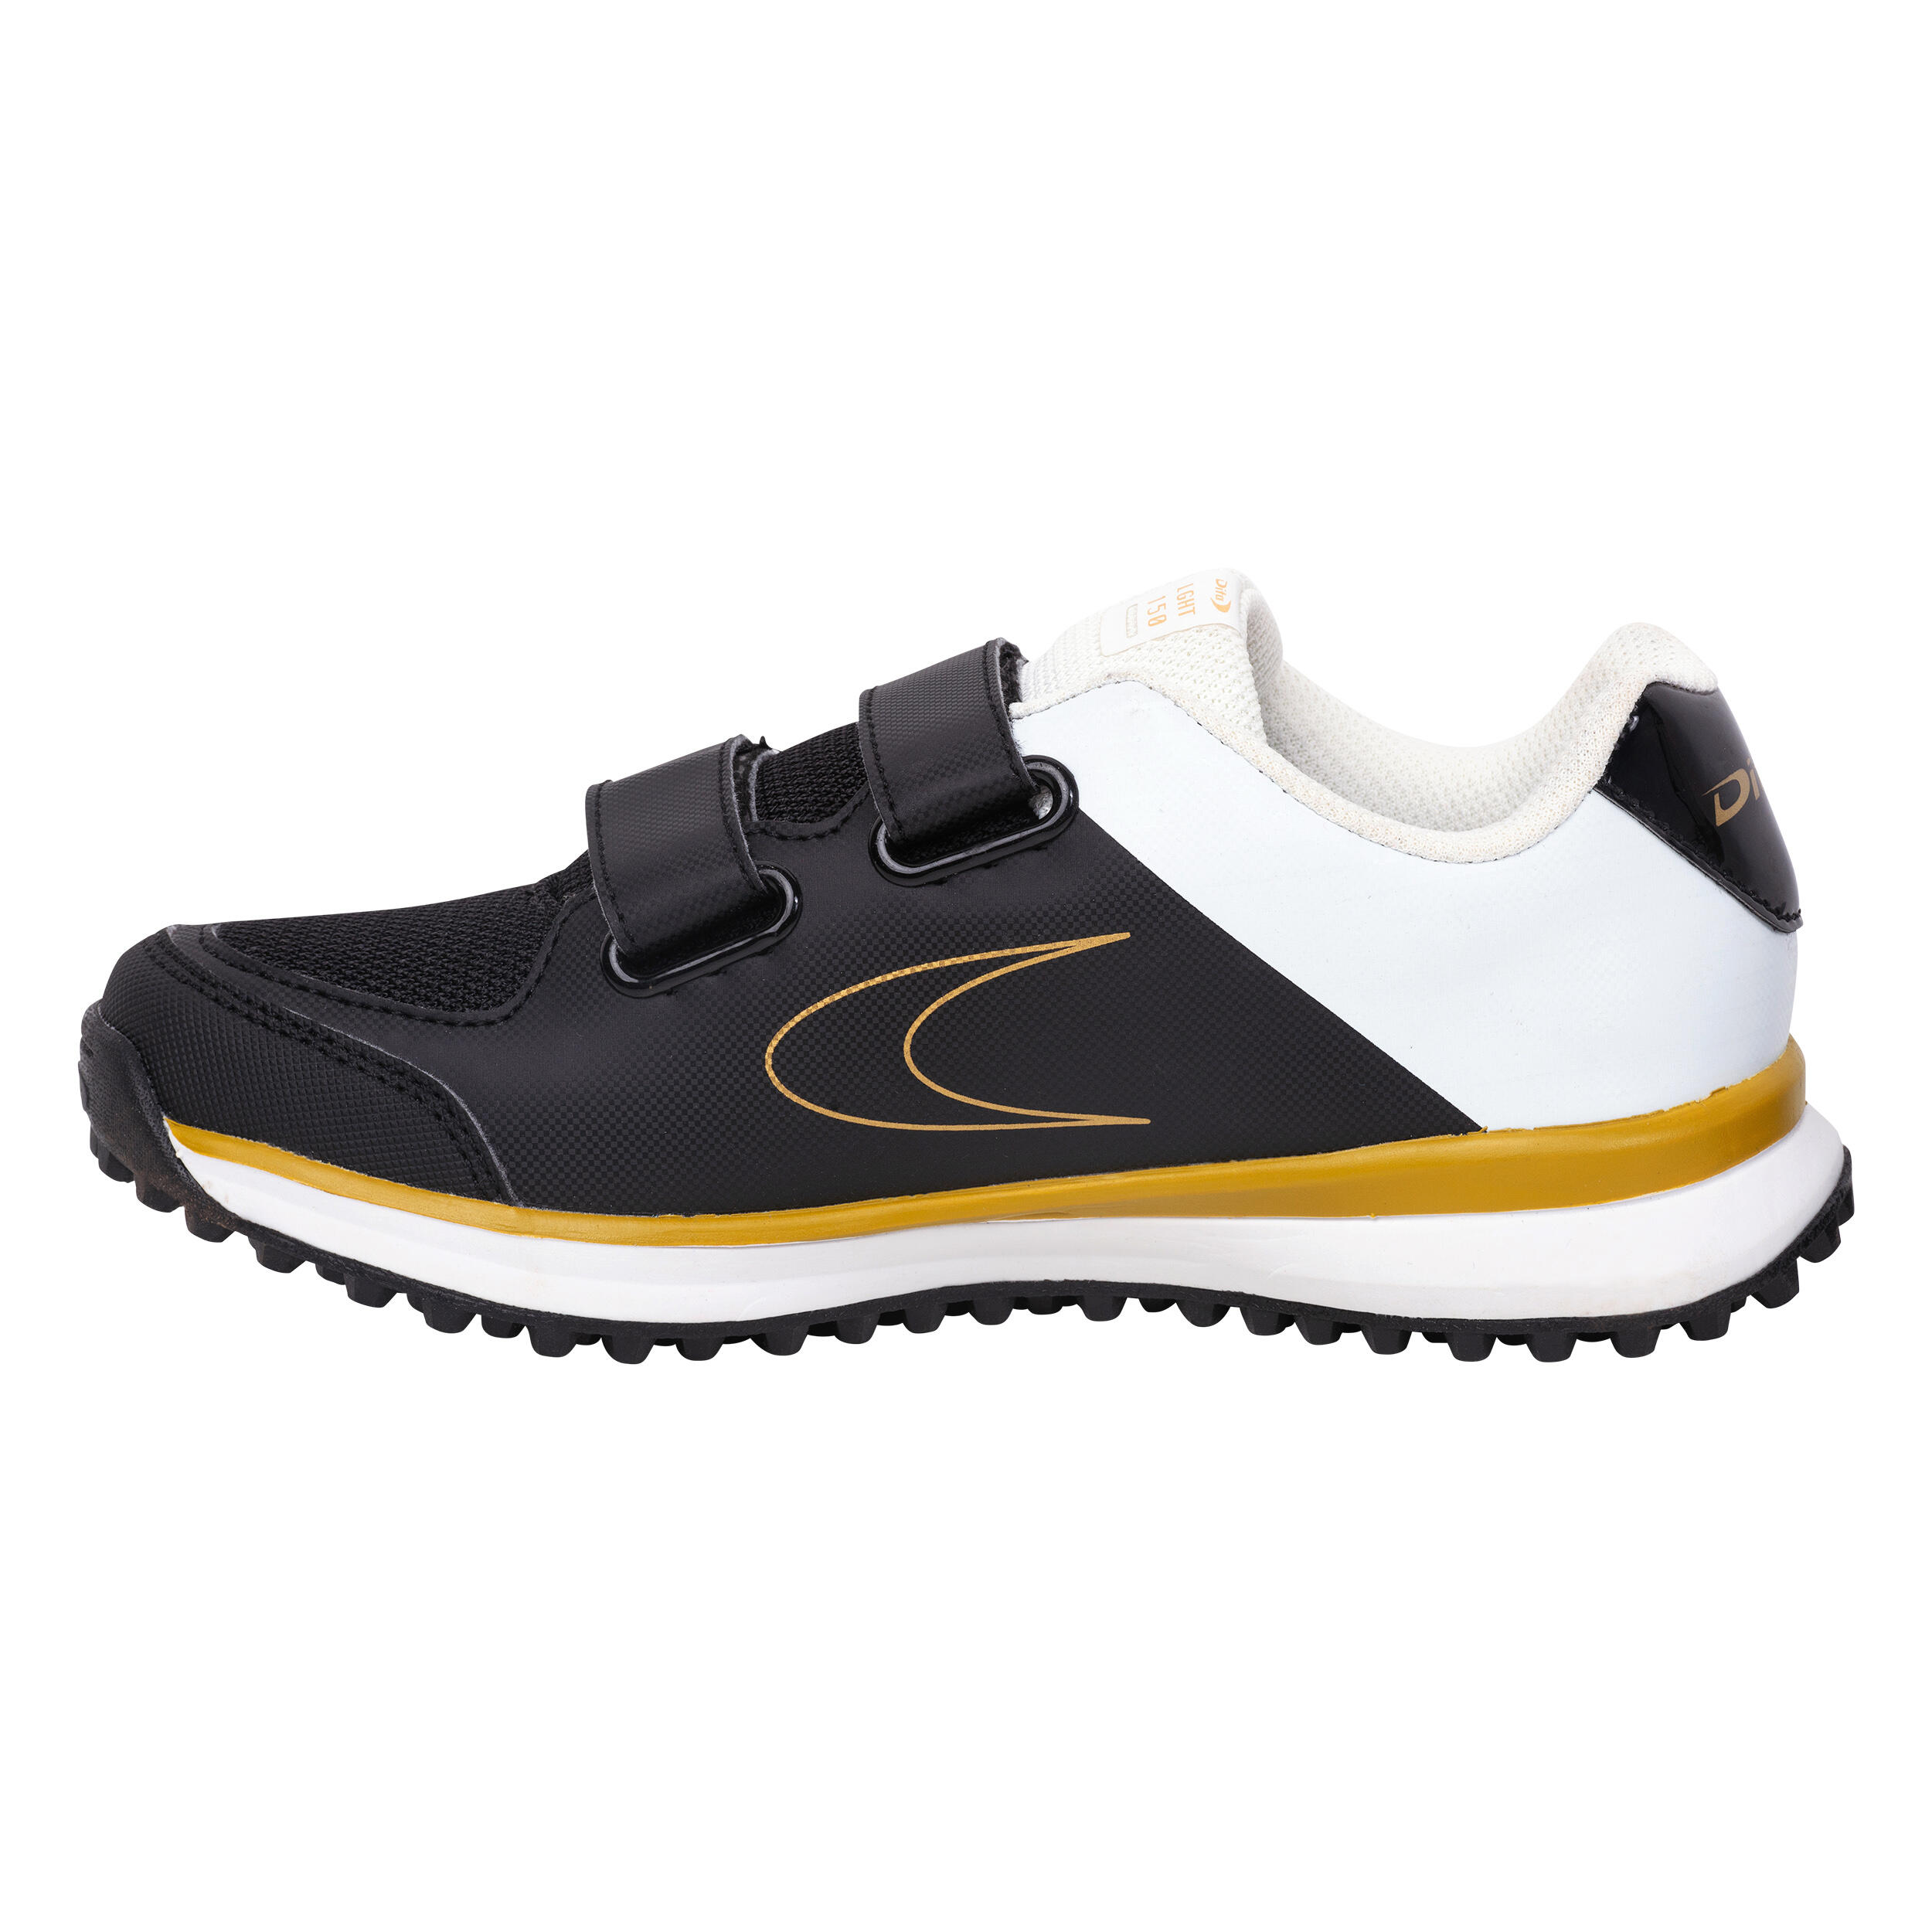 Kids' Low-Intensity Field Hockey Shoes Fix And Go - White/Black 3/7